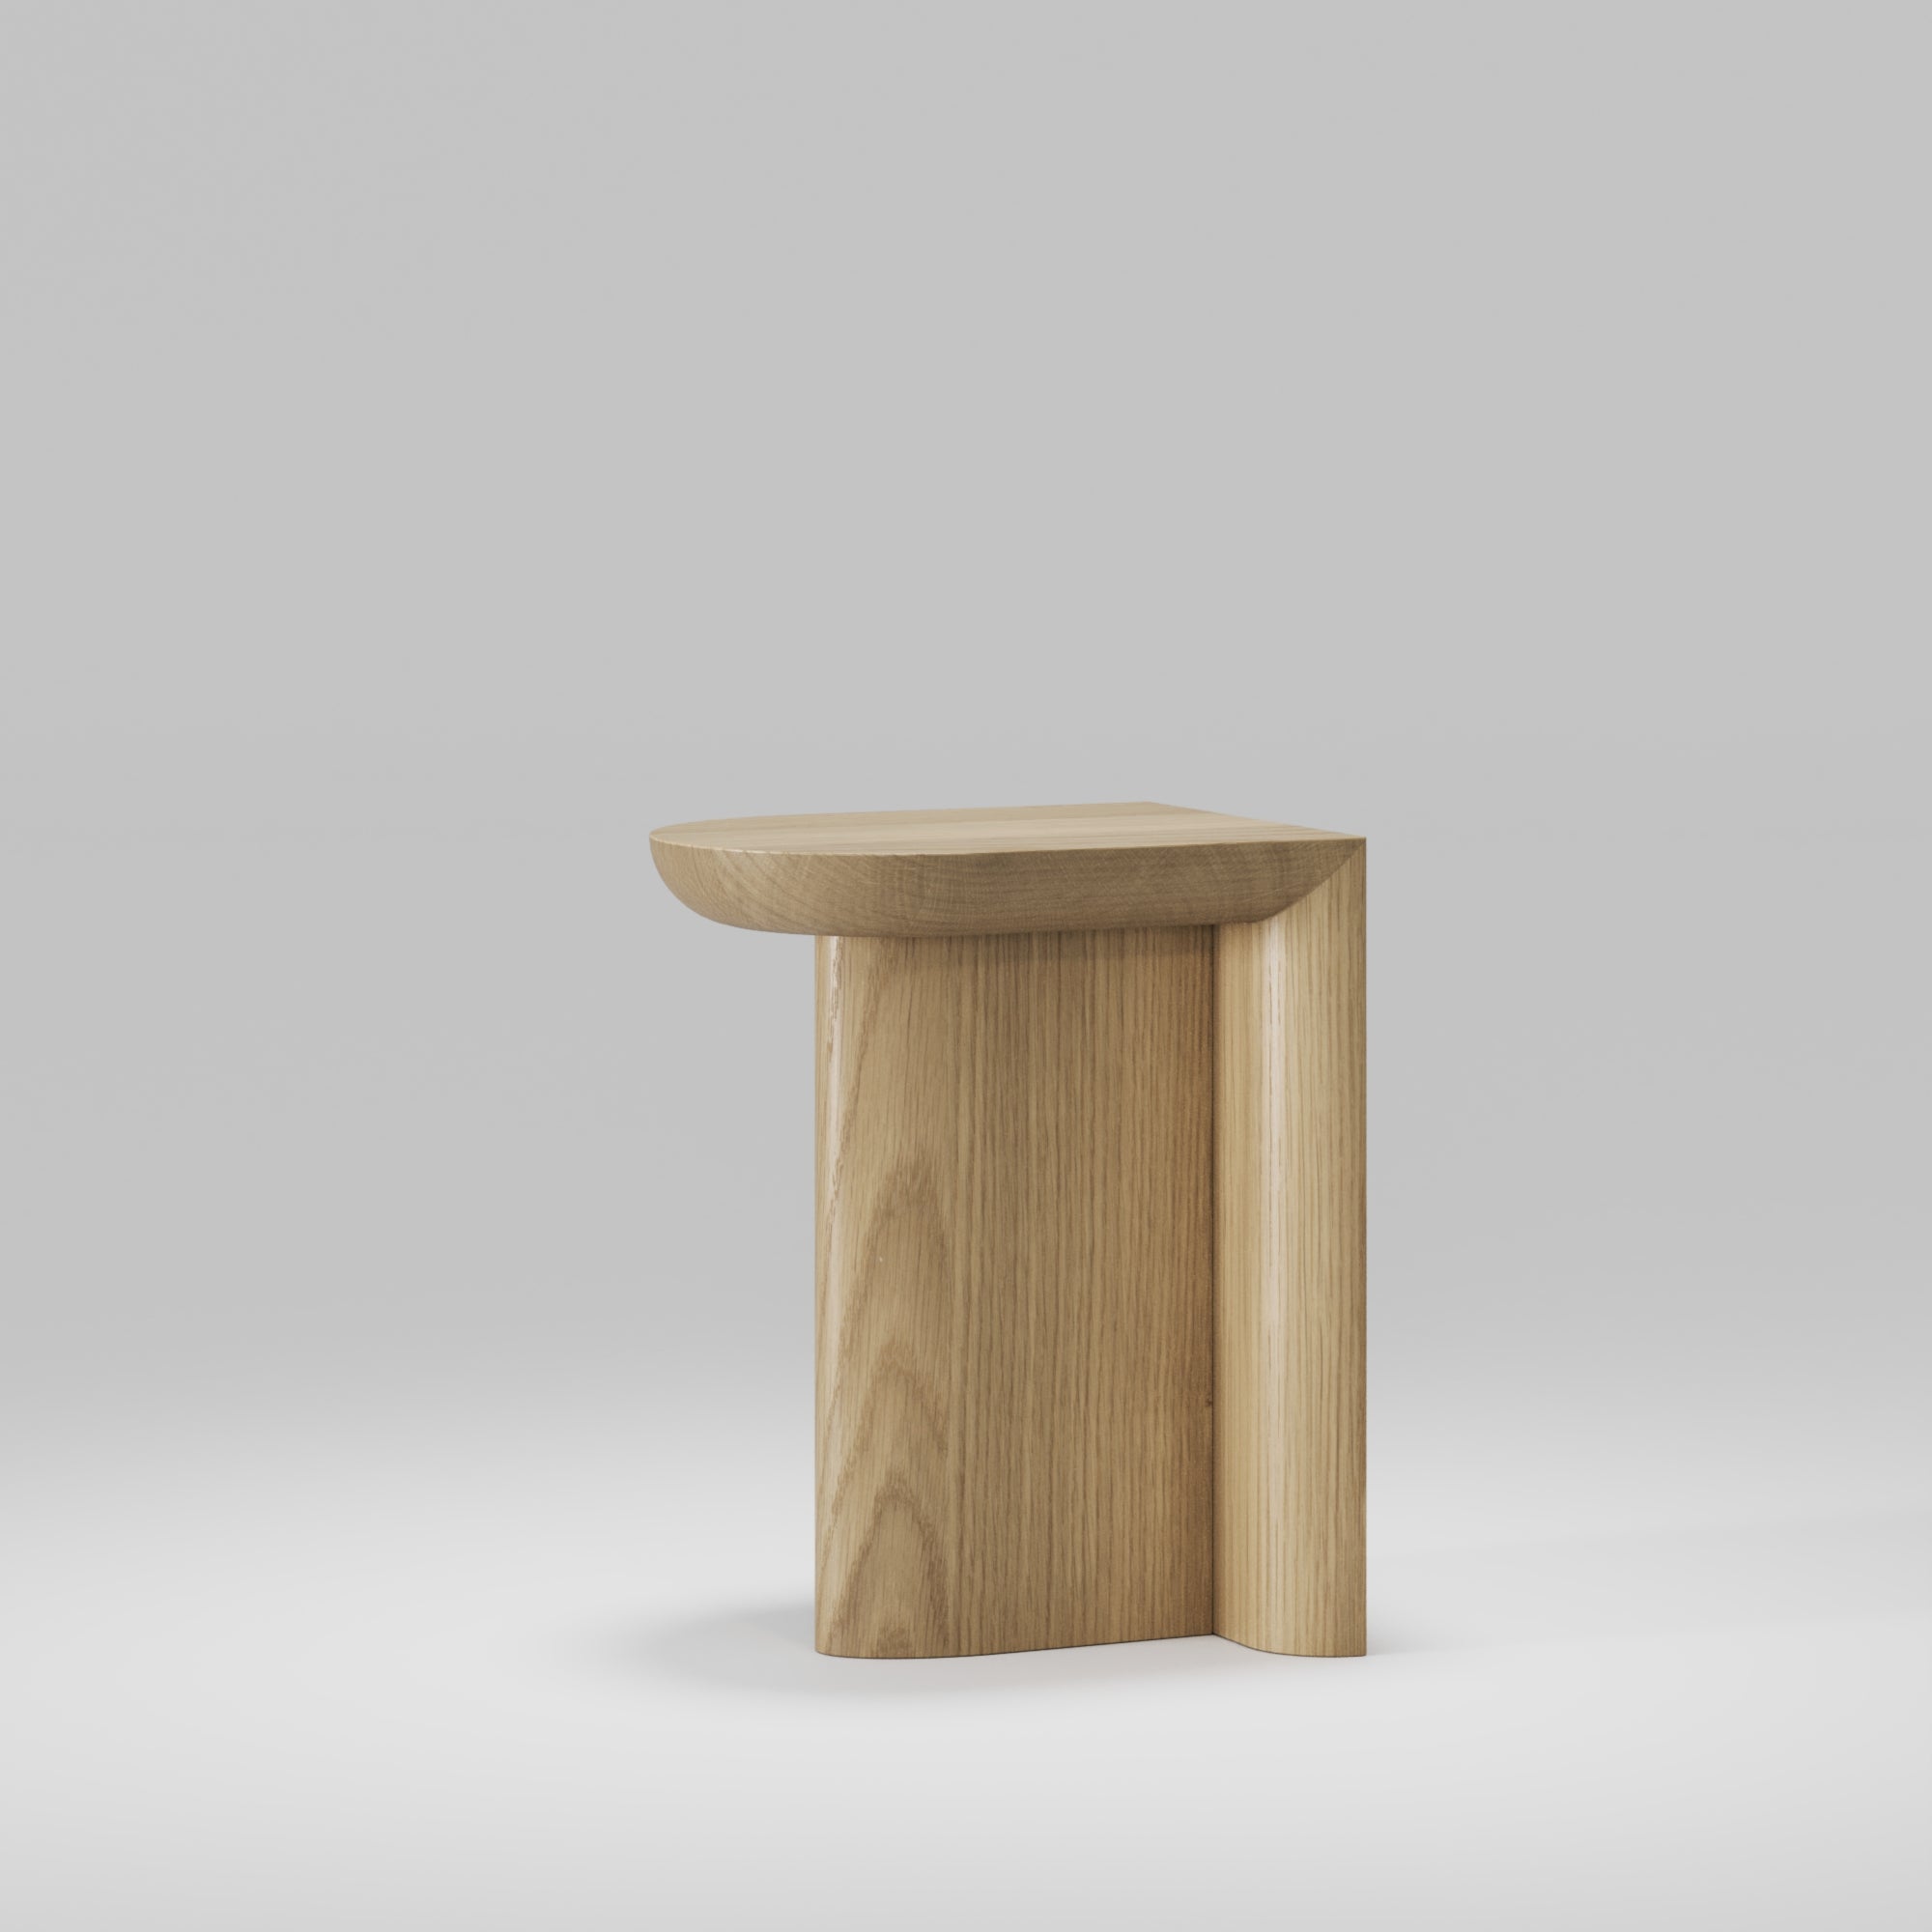 Re-Form Coffee | Side Tables by WeWood